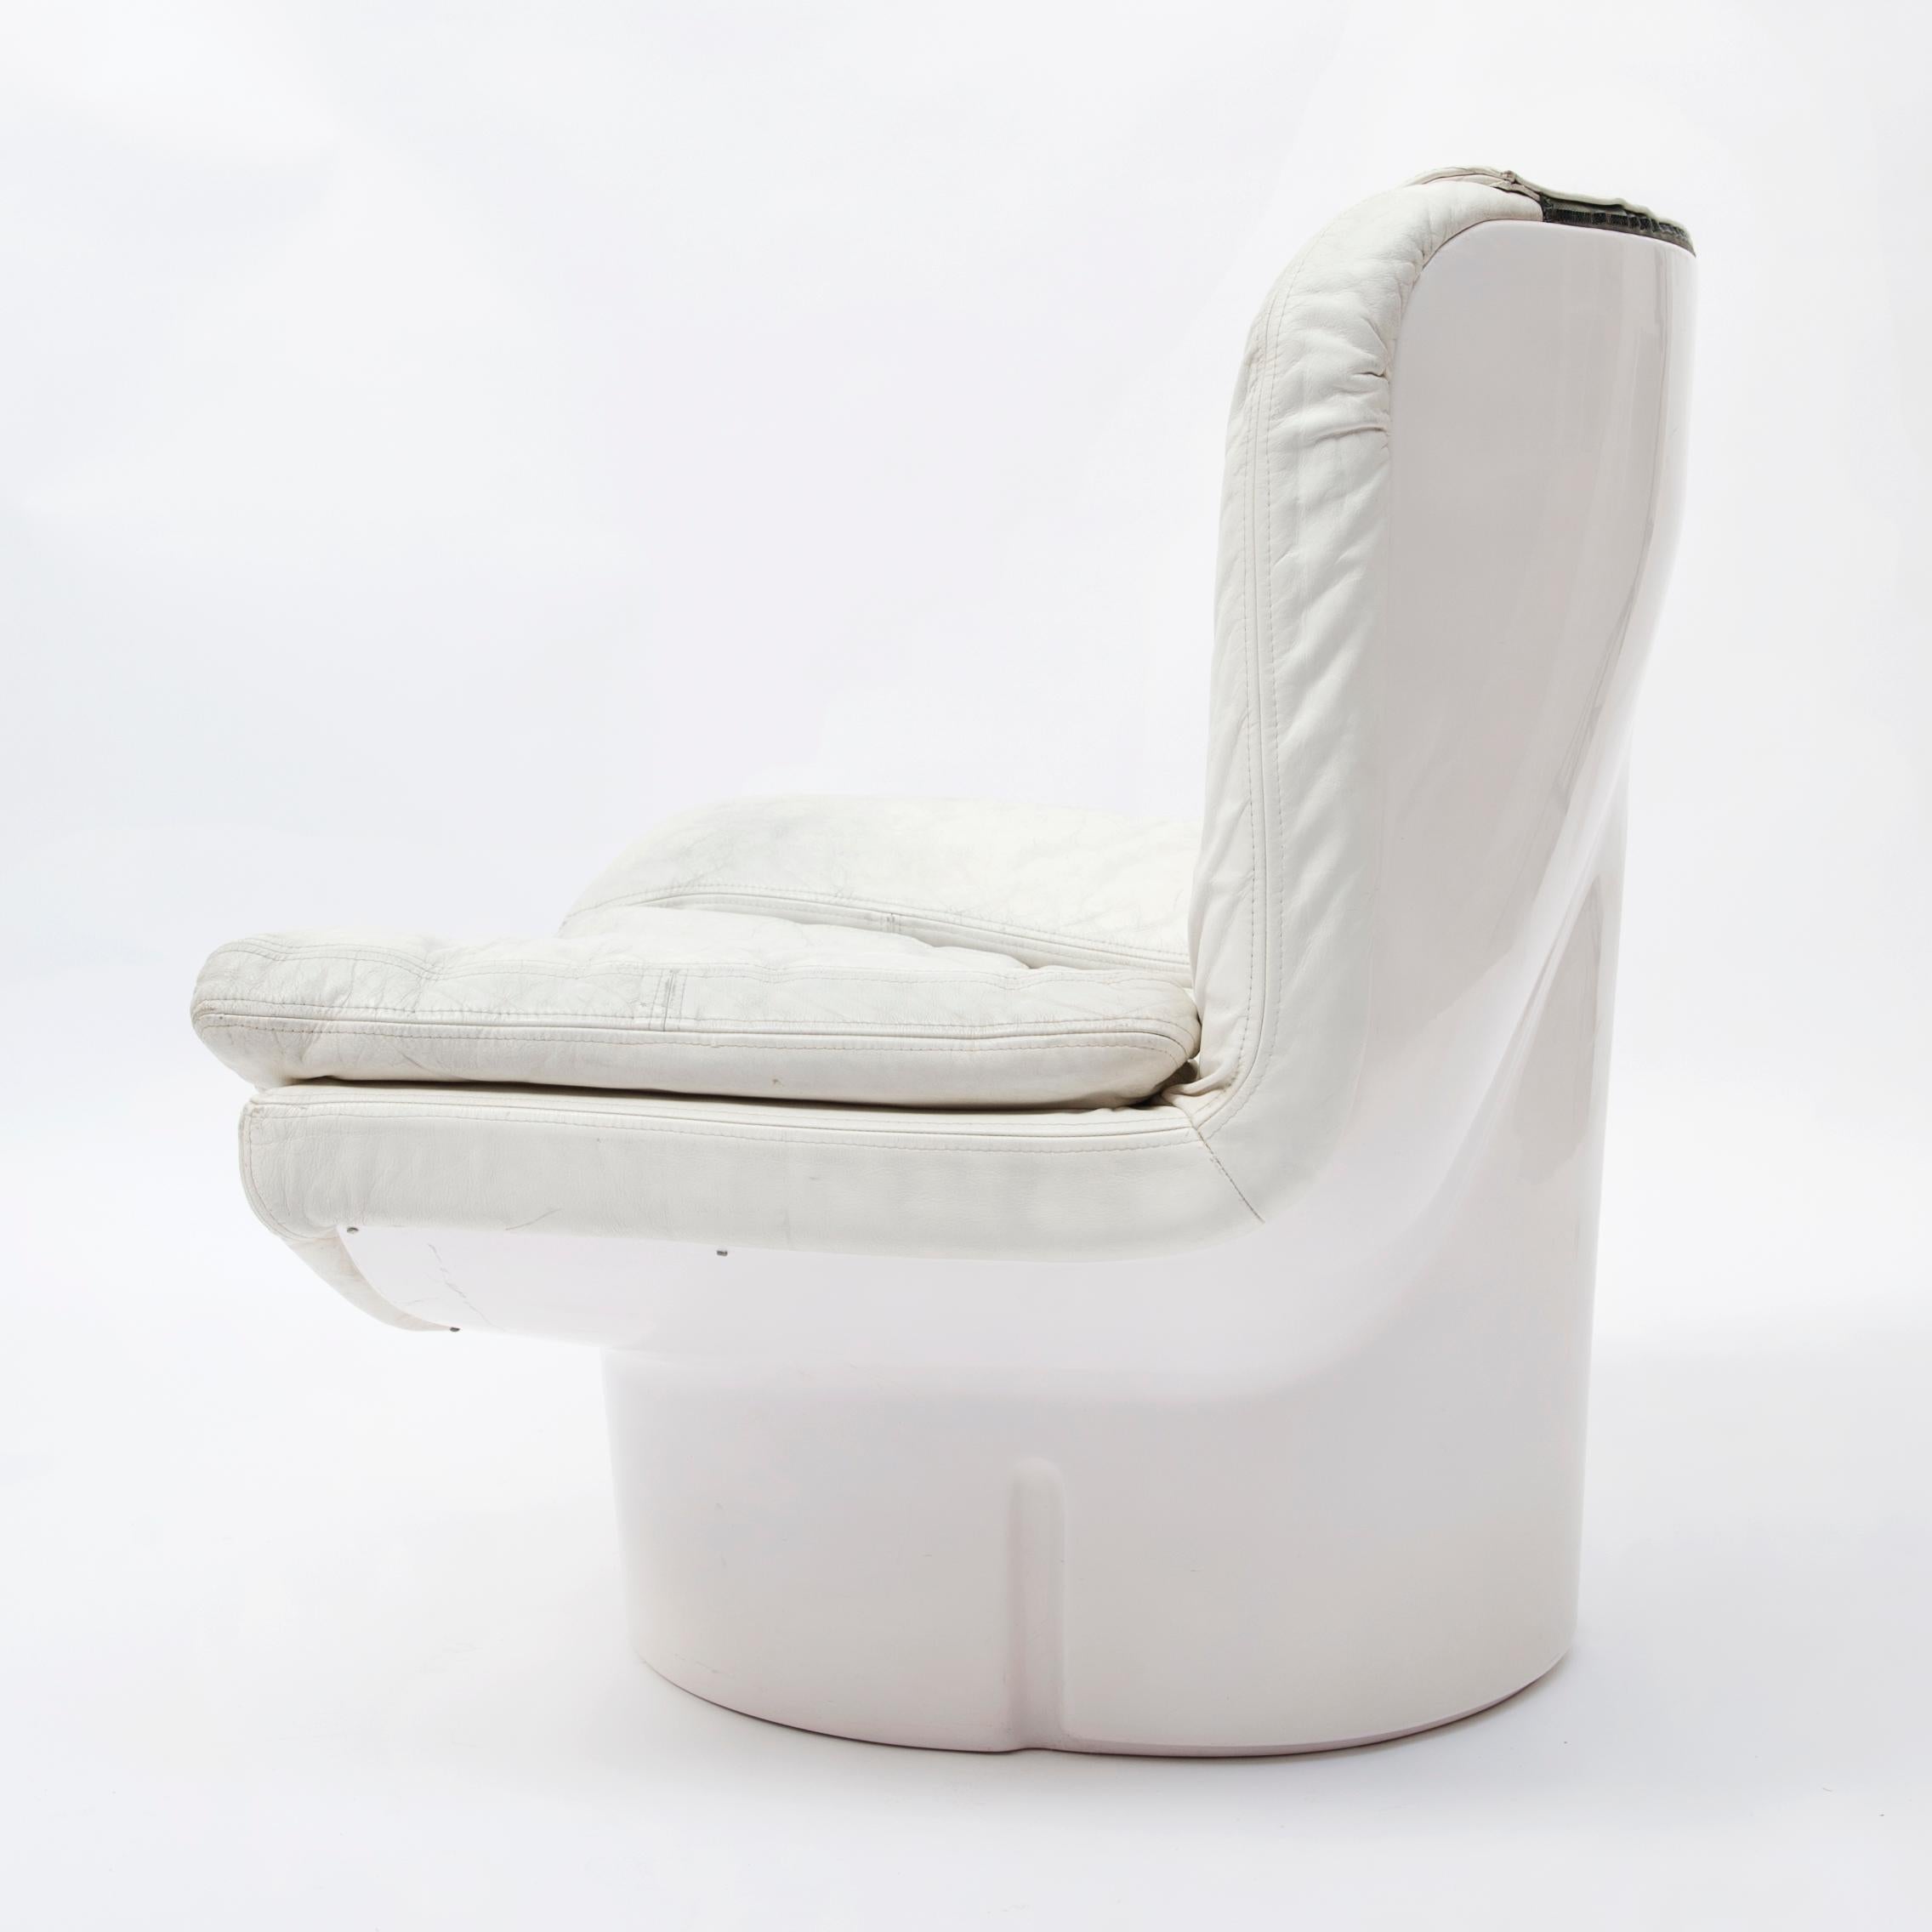 This Space Age lounge chair (model Il Potrone) was designed for Comfort in Italy as part of the Il Poltoni 175 series by T. Ammannati and G.P. Vitelli in 1973. It features a white polyester shell with the original white leather upholstery.